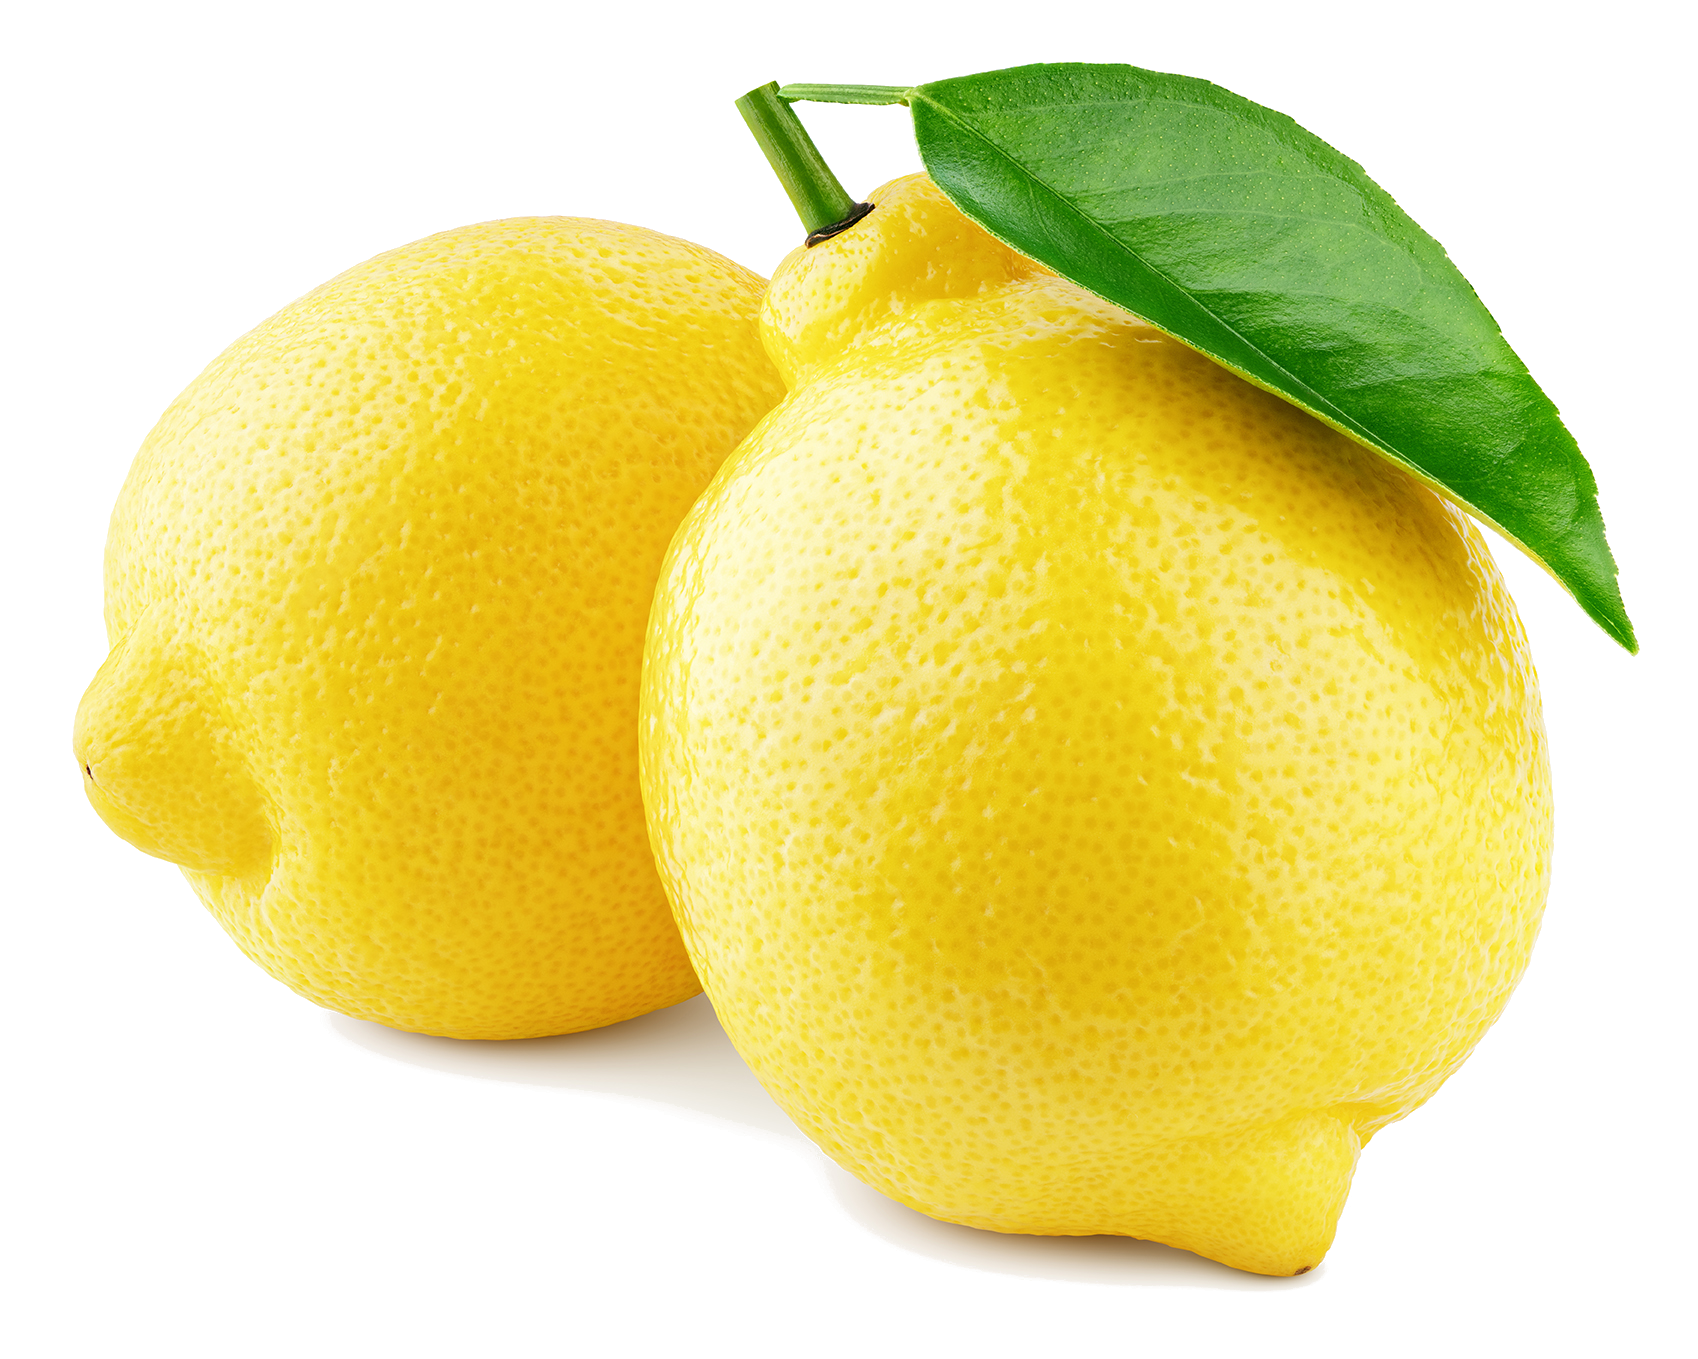 Primofiori lemon-Also called fino, it has an oval shape. The bark of the fruits is thin and smooth. It has a lot of juice and a delicate acidity. Its production runs from September to April.